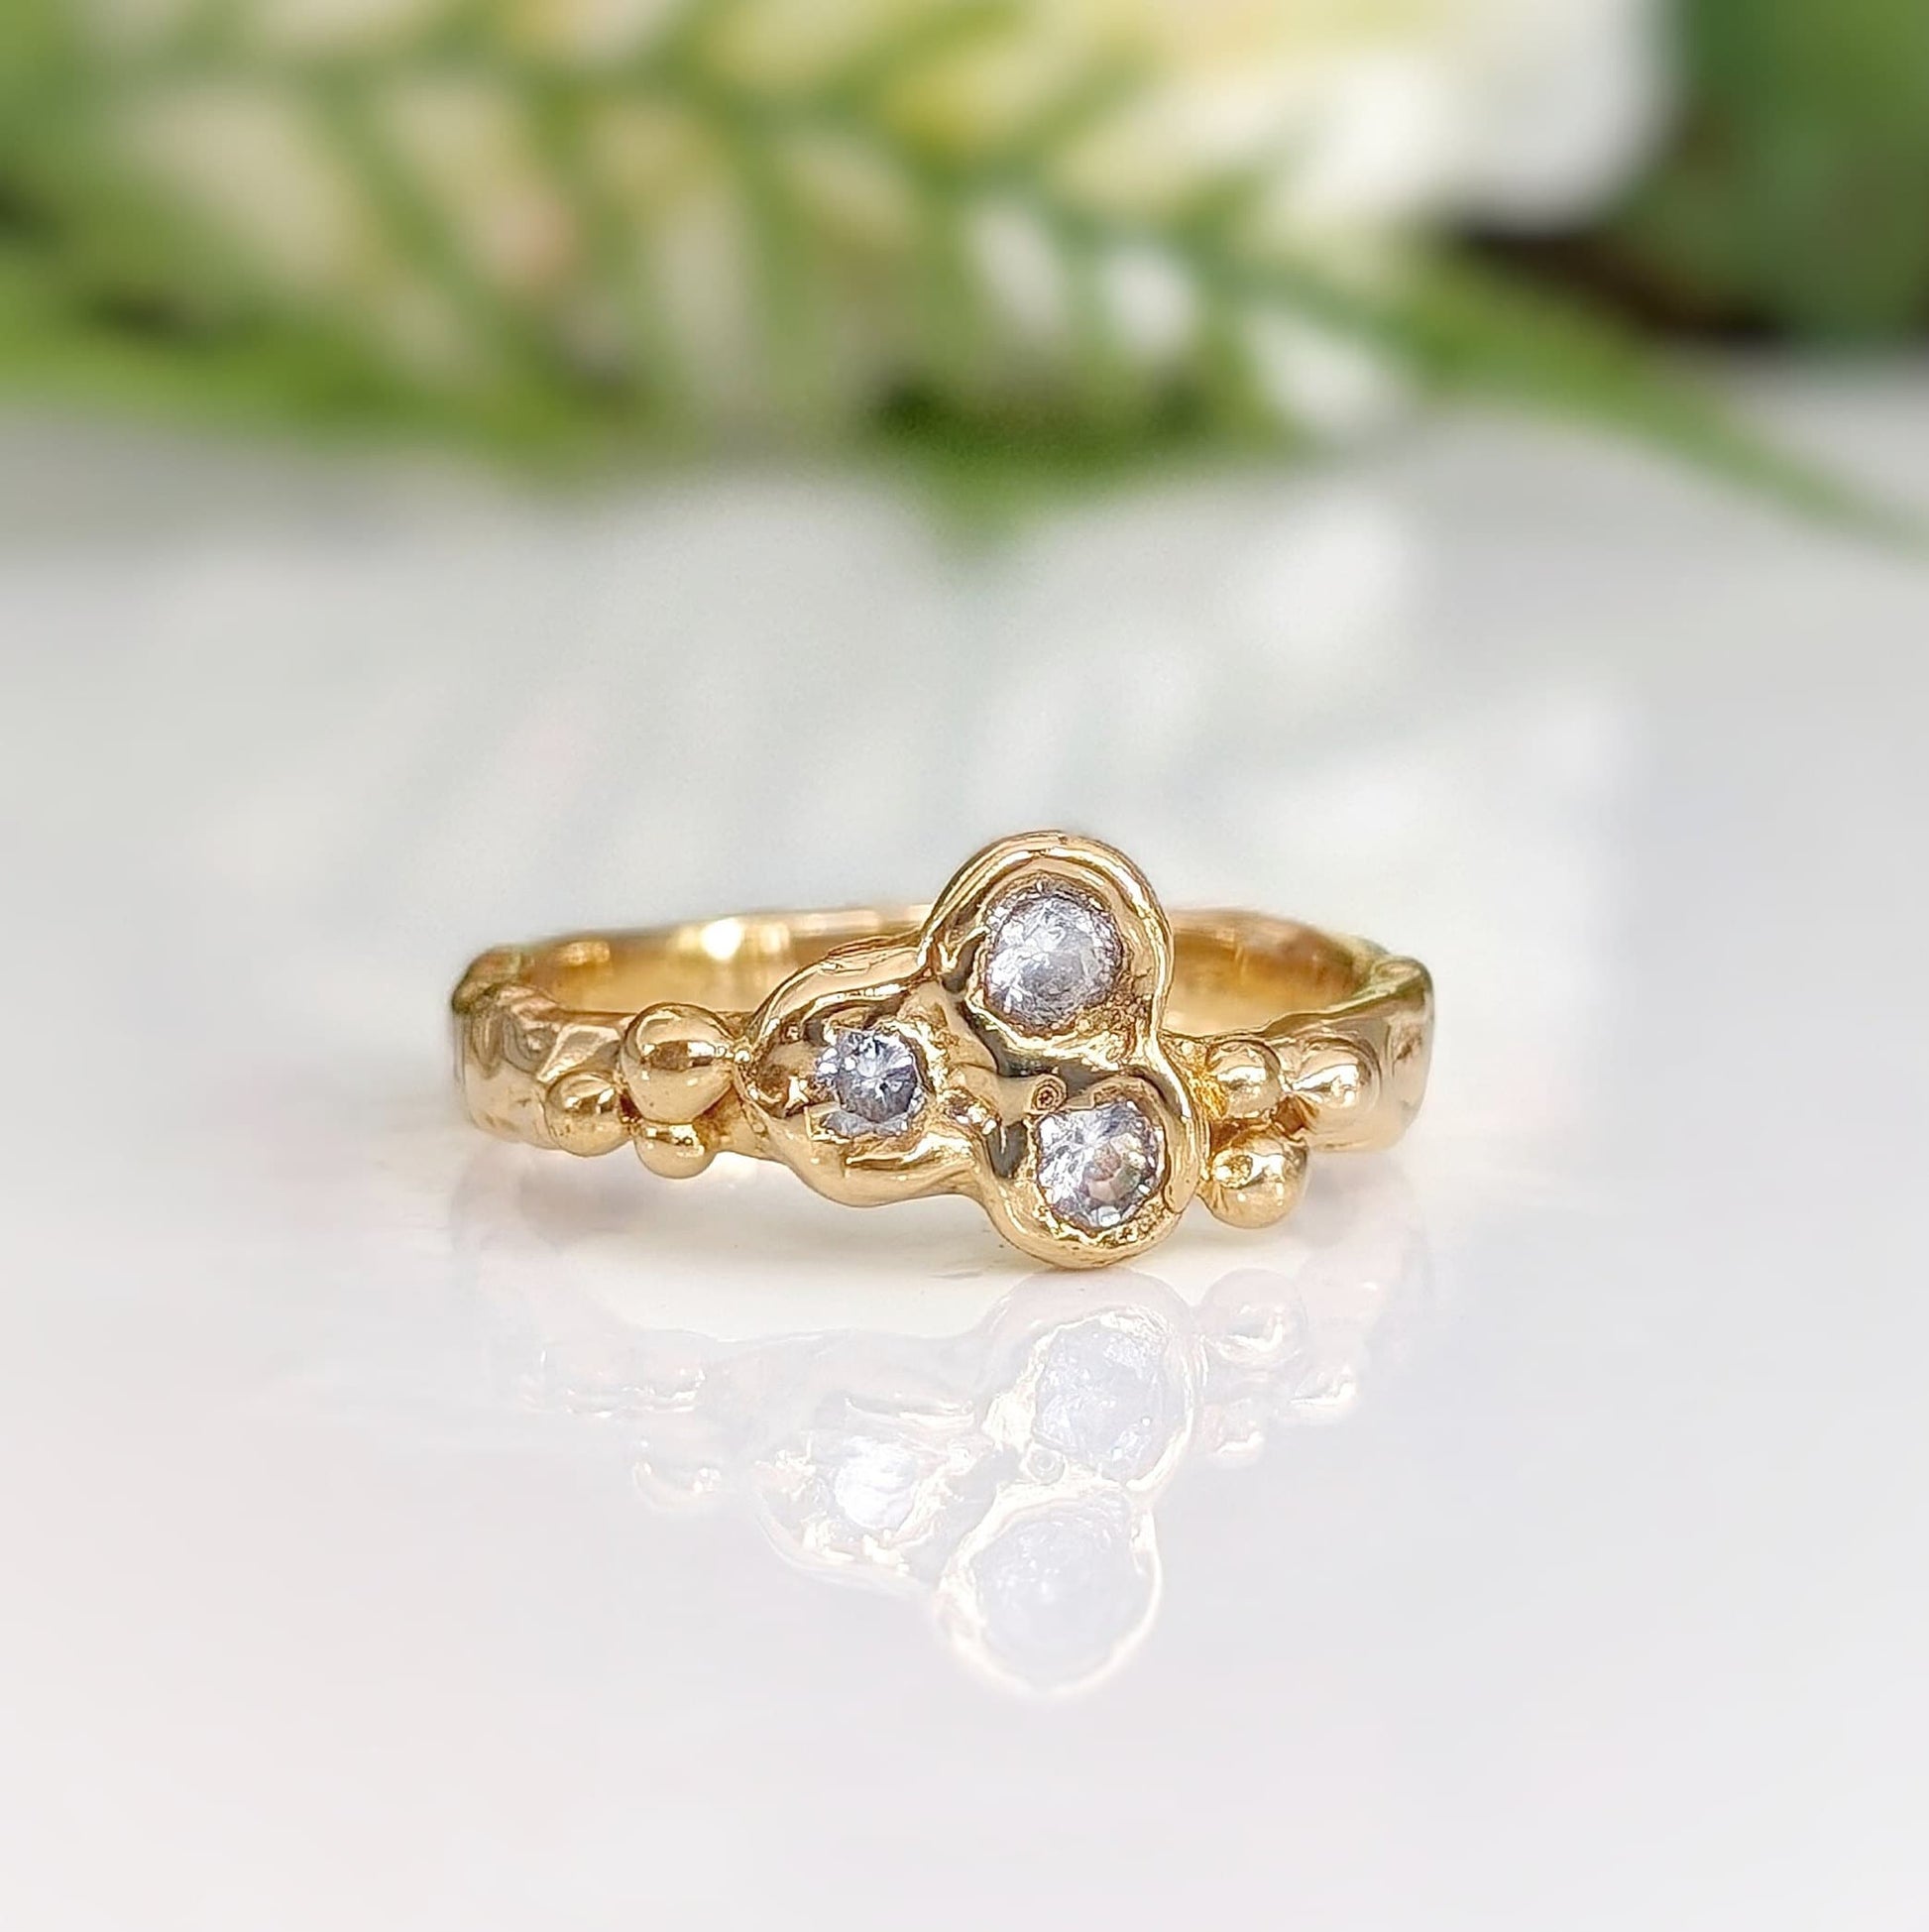 Cluster of 3 small Cubic Zirconias set by prongs on a textured Molten Solid 14k Gold band